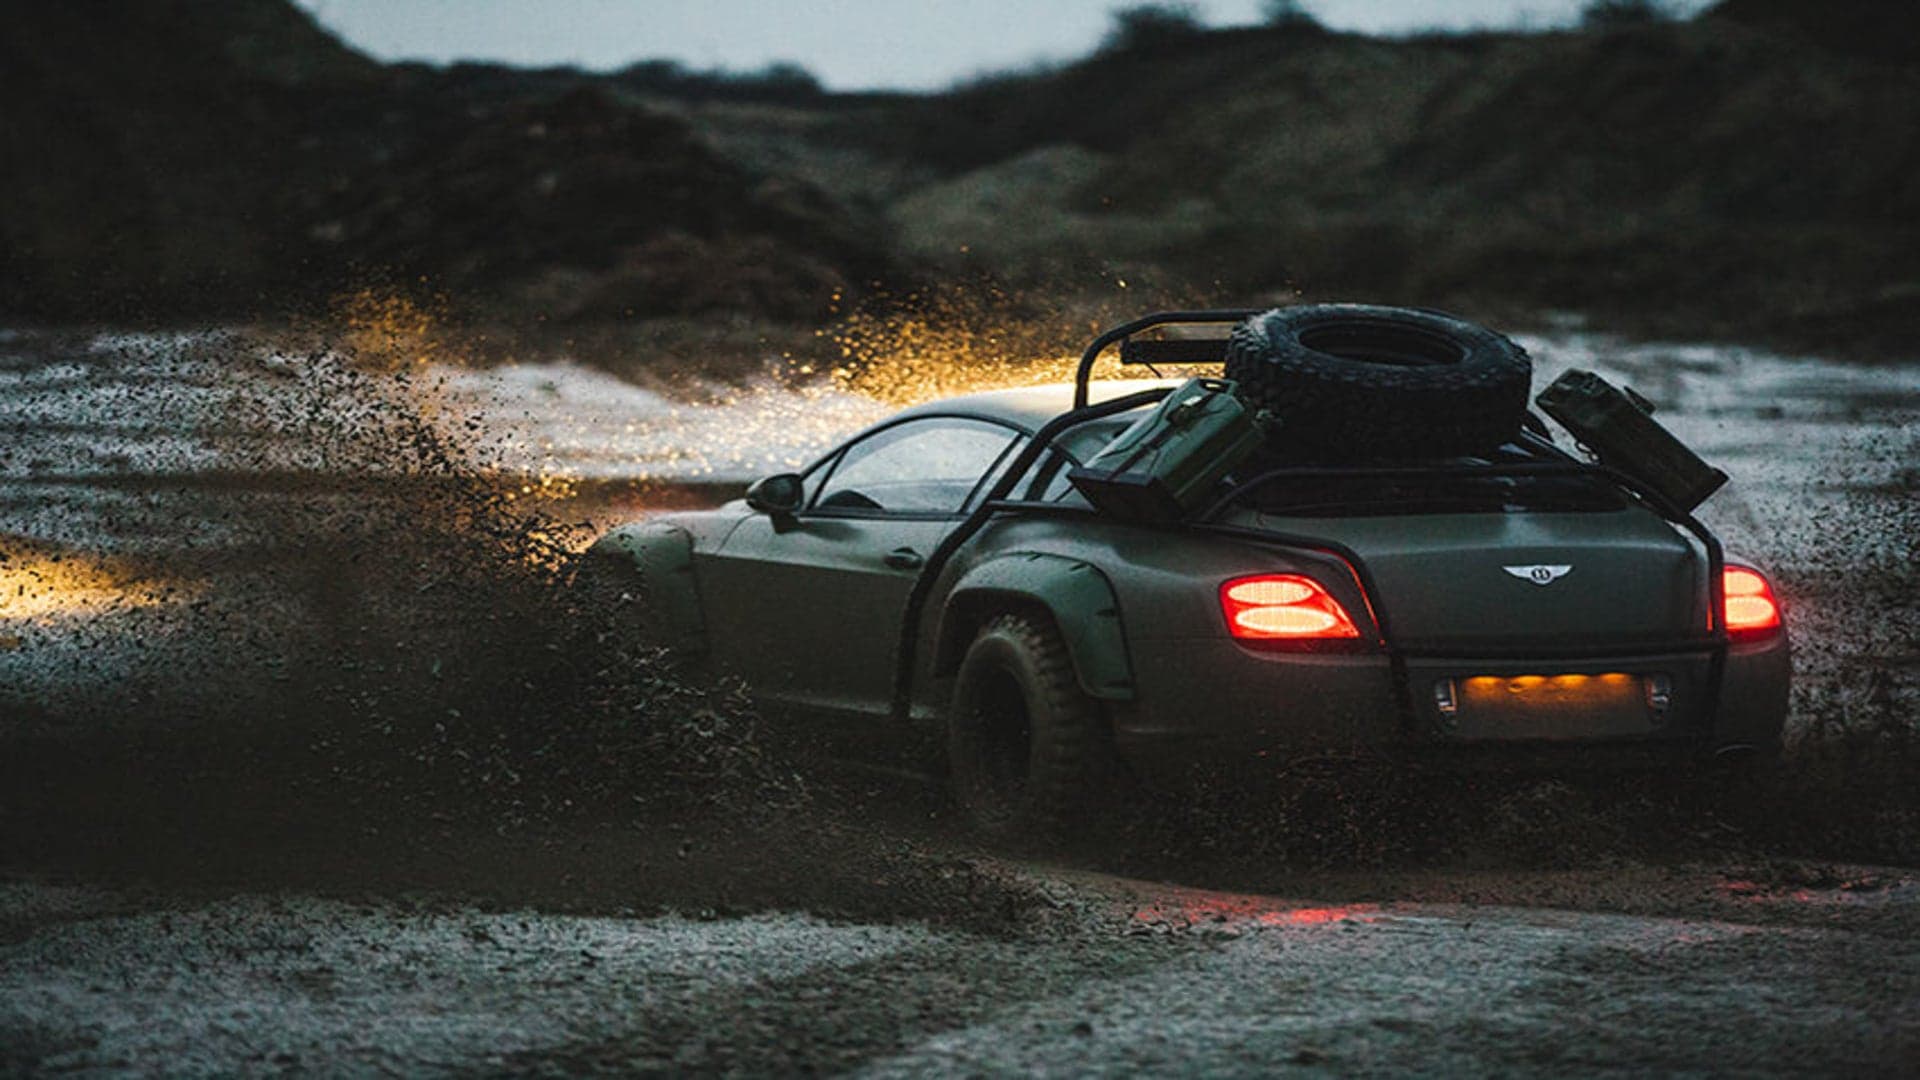 This Off-Road-Ready Bentley Continental GT Could Be Yours, Thanks to eBay